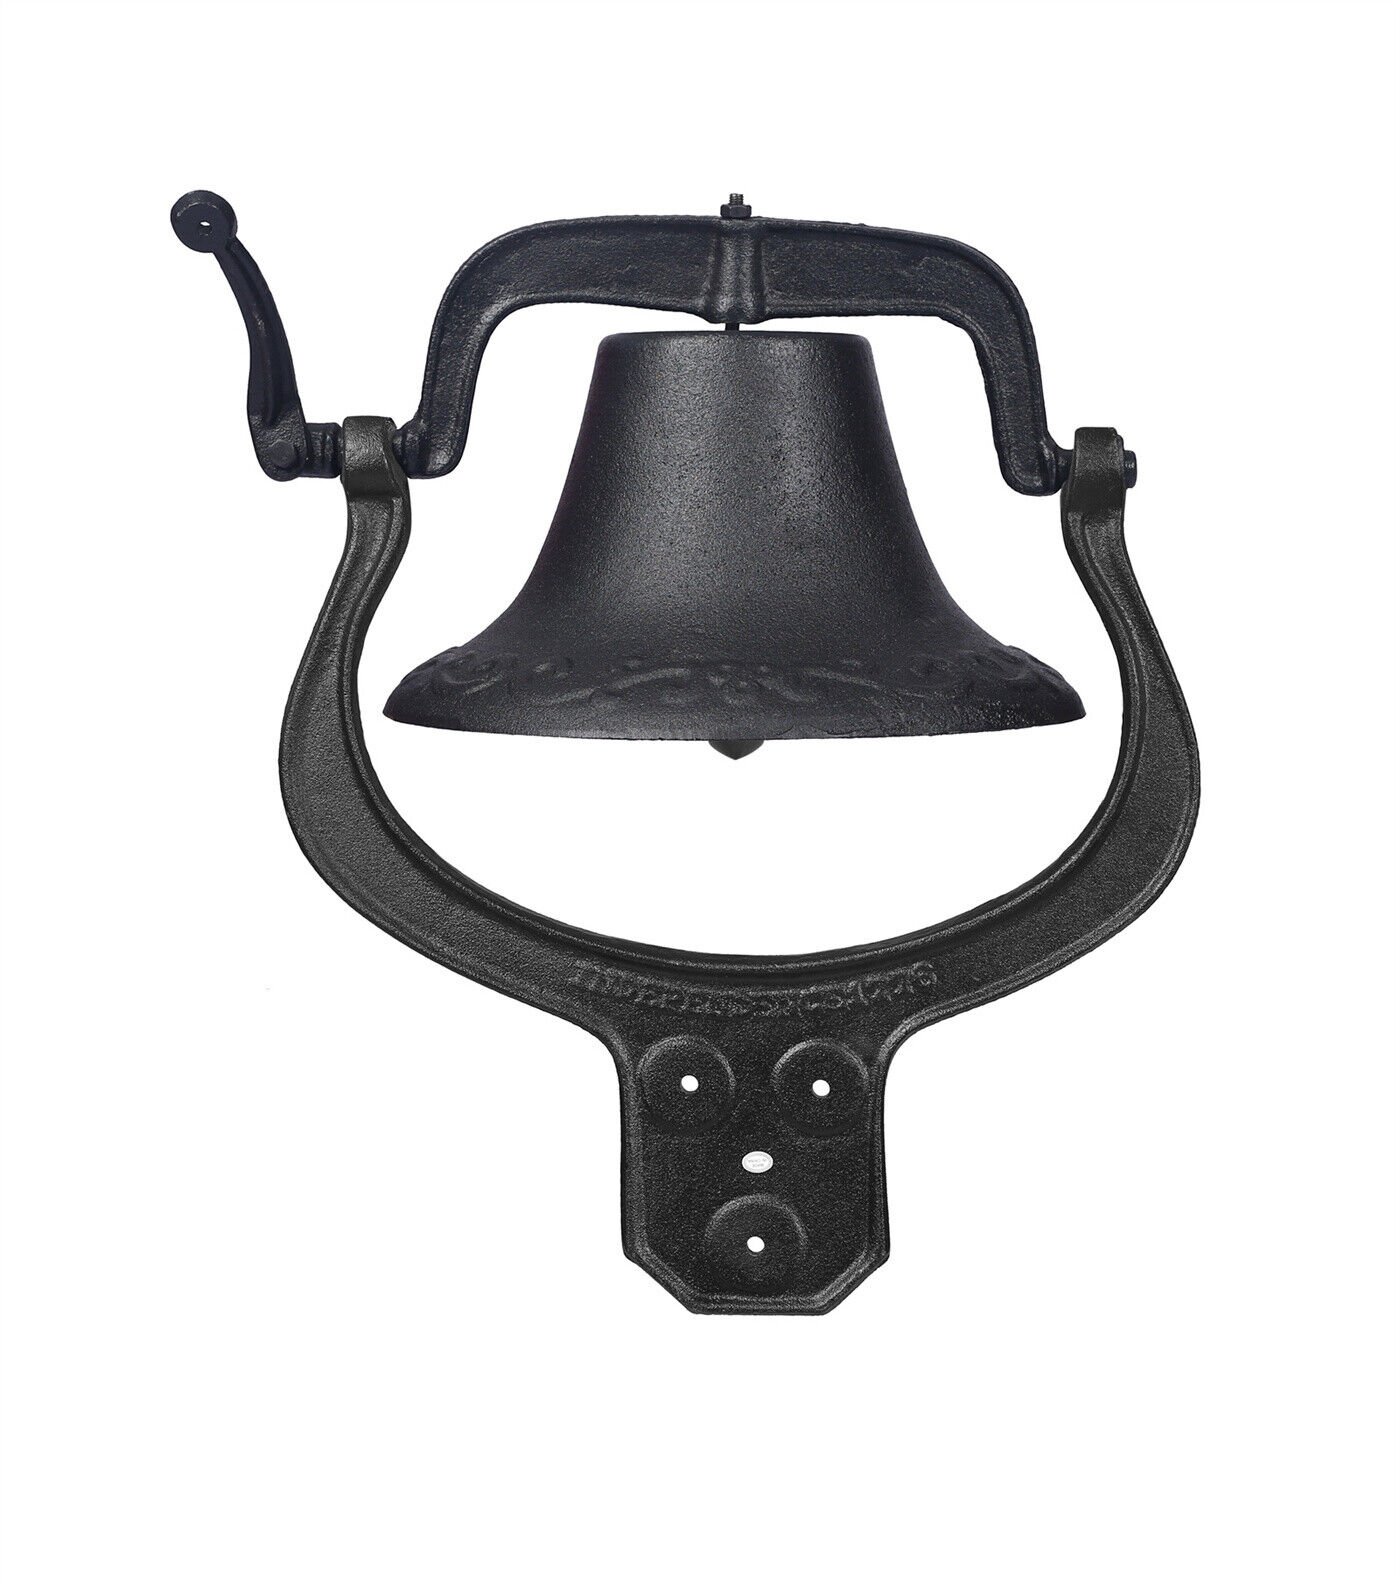 Large Cast Iron Dinner Bell for Farm Church School Antique Vintage Style School